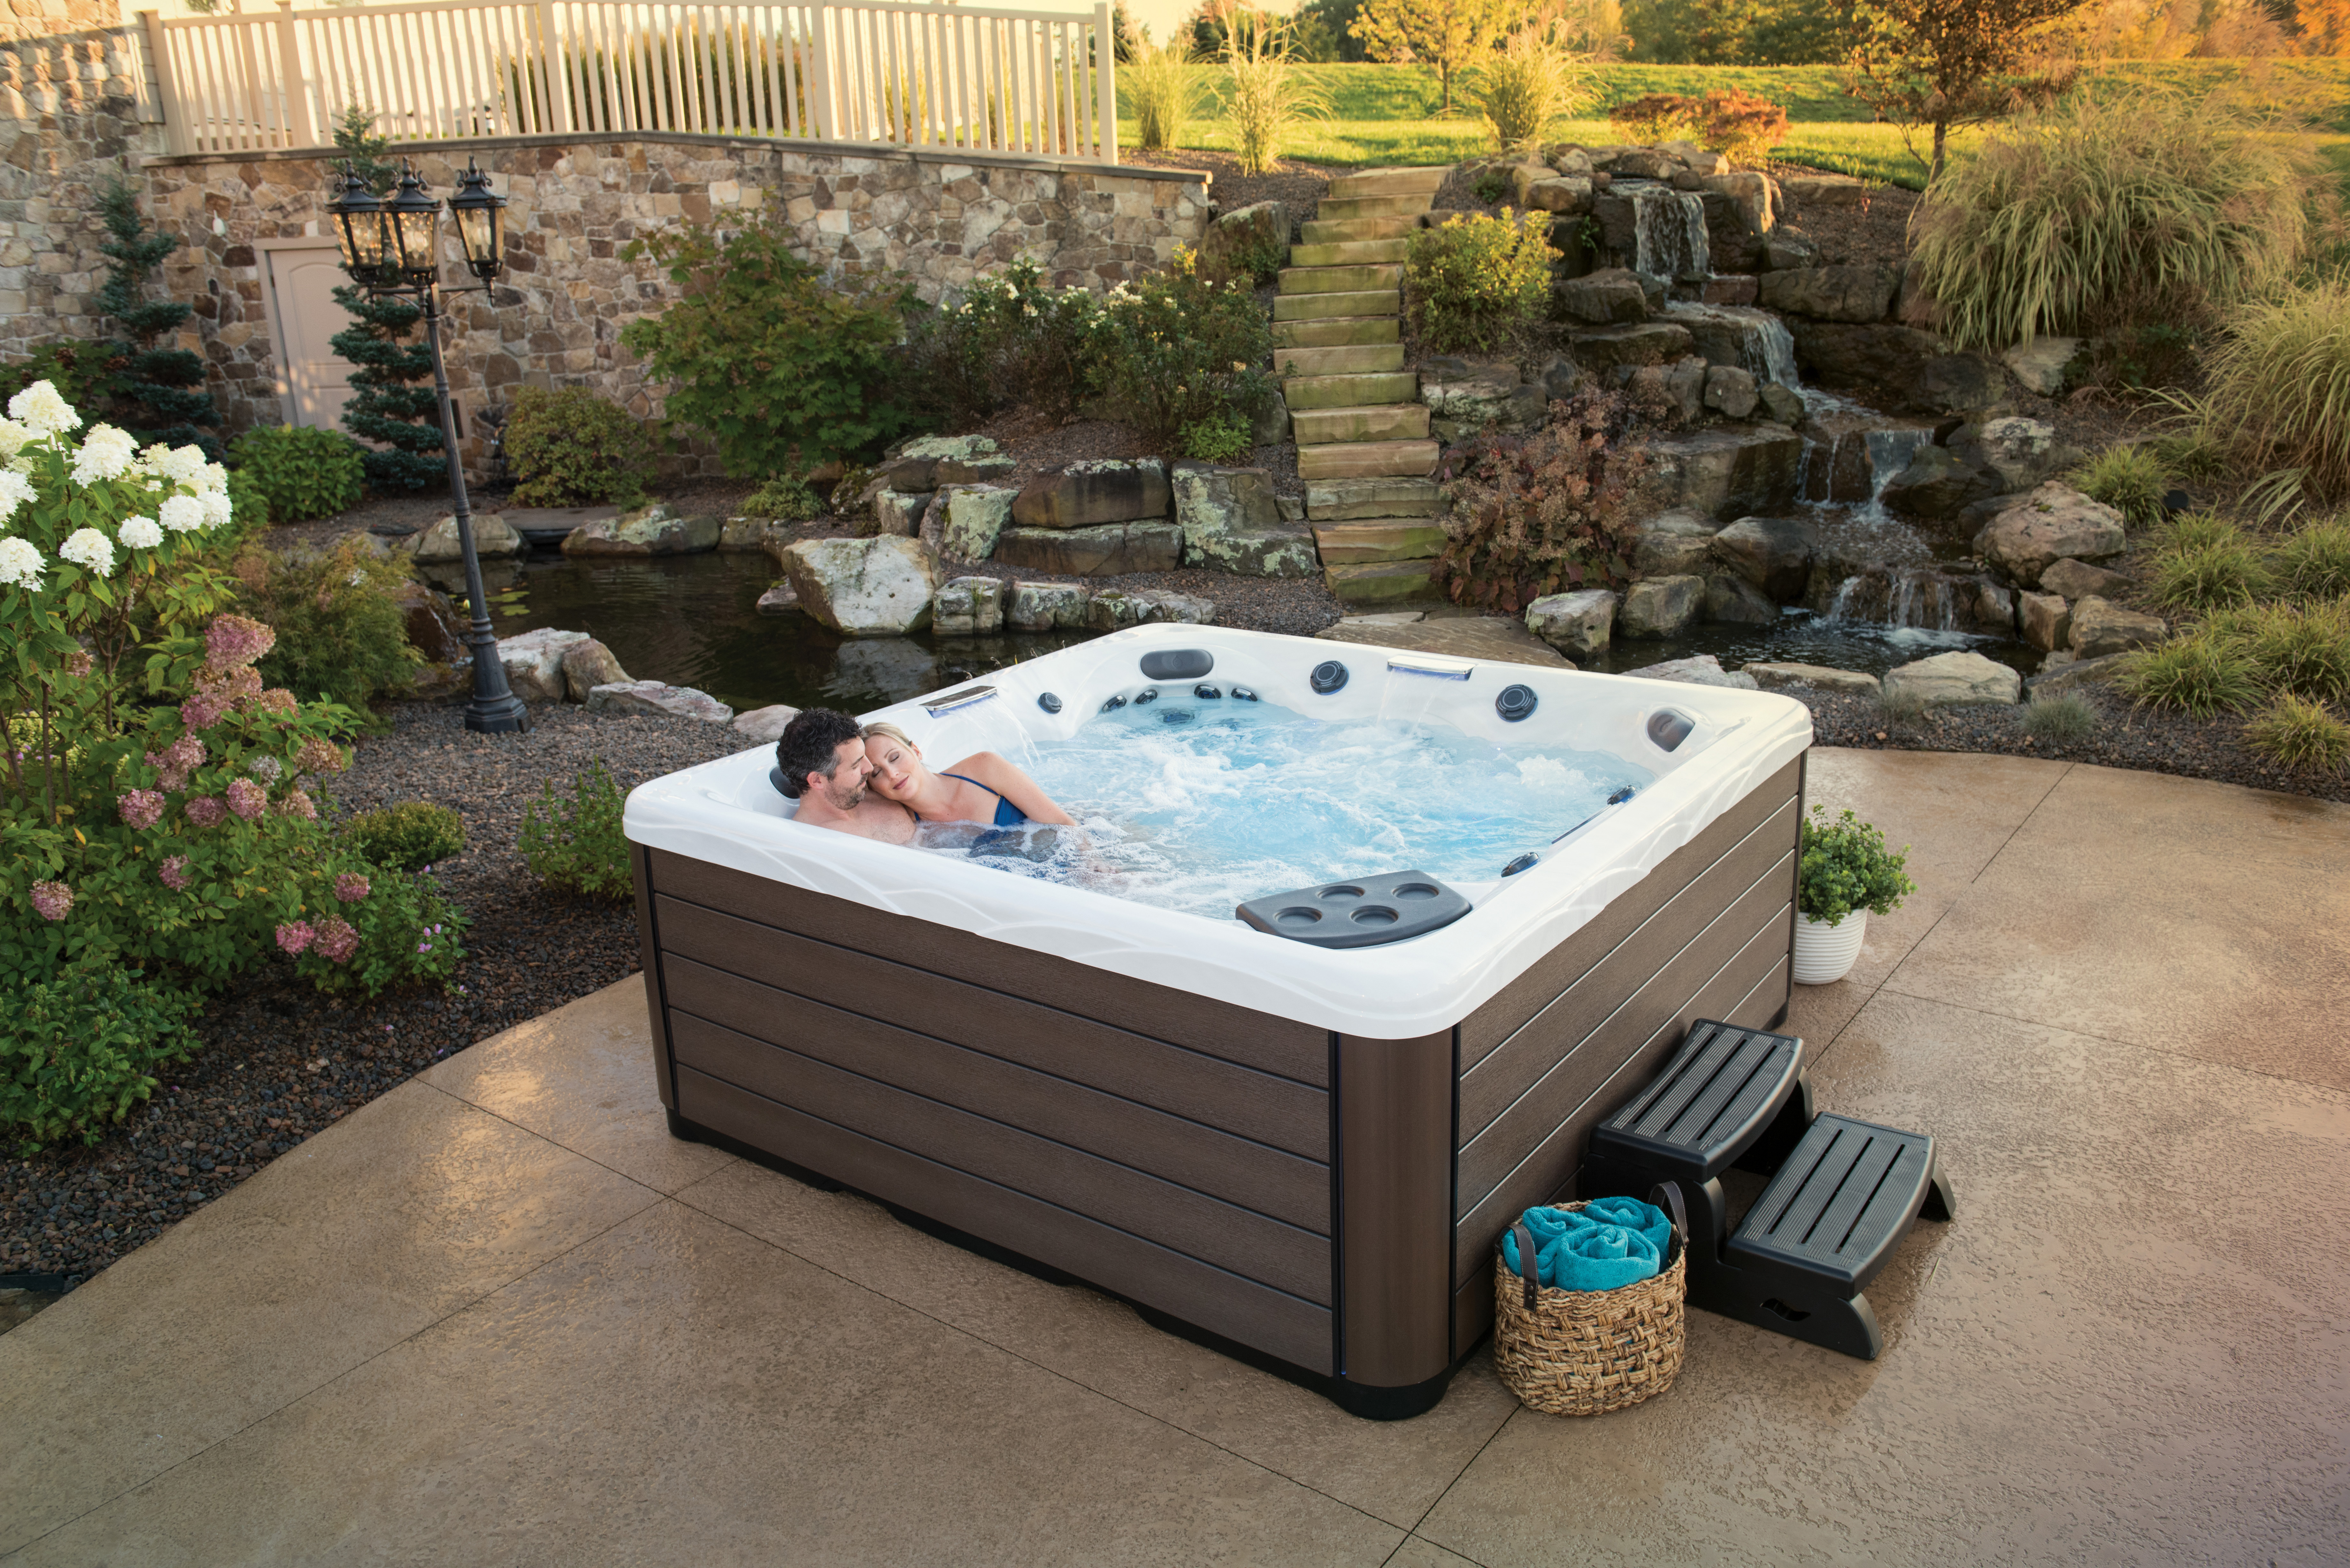 How Deep is a Hot Tub? 